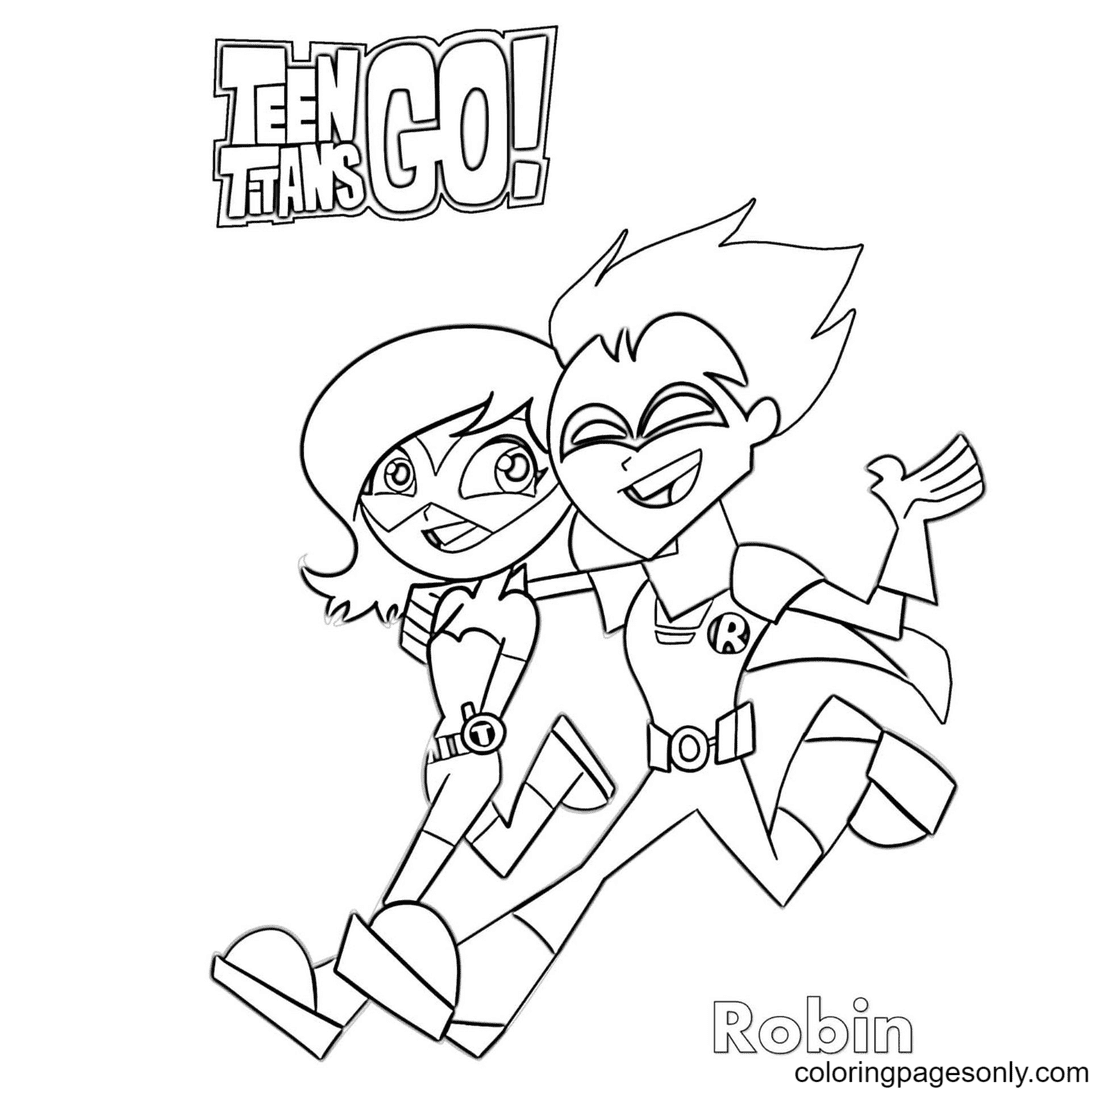 Robin and friend Teen Titans Go Coloring Page